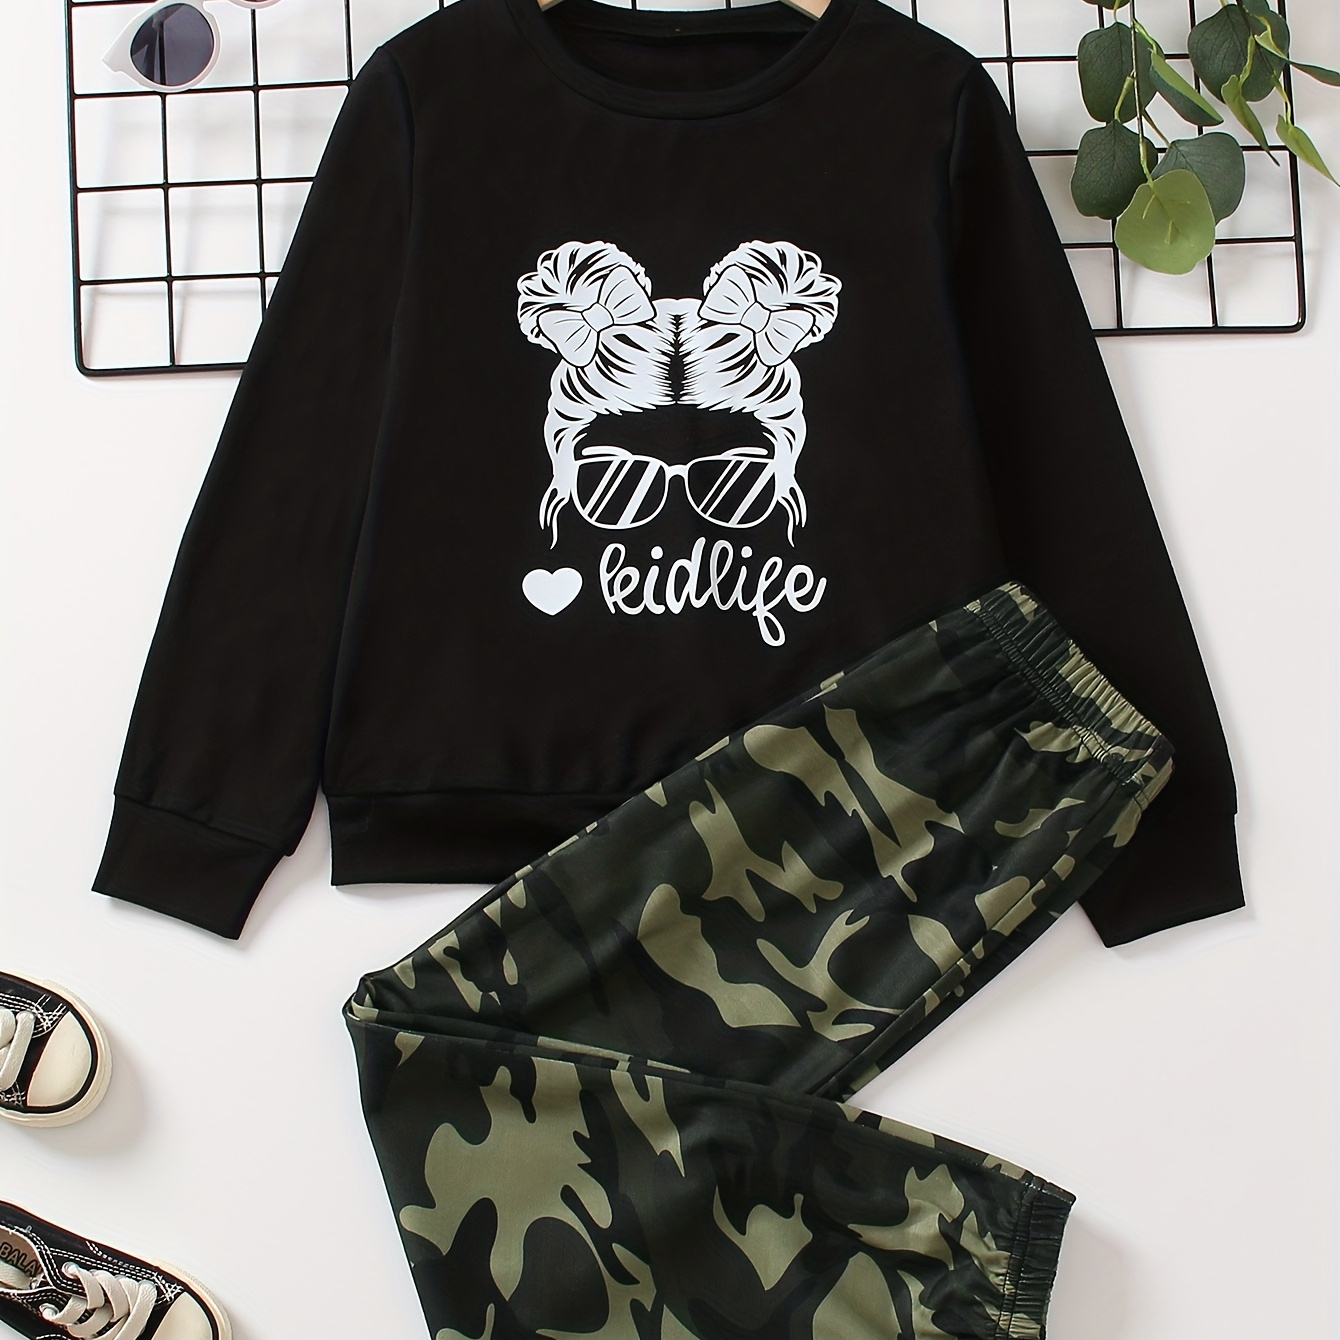 

2pc Girls Kidlife Print Crew Neck Sweatshirt & Camouflage Jogger Pants, Casual Outfits Fall Winter Kids Clothes